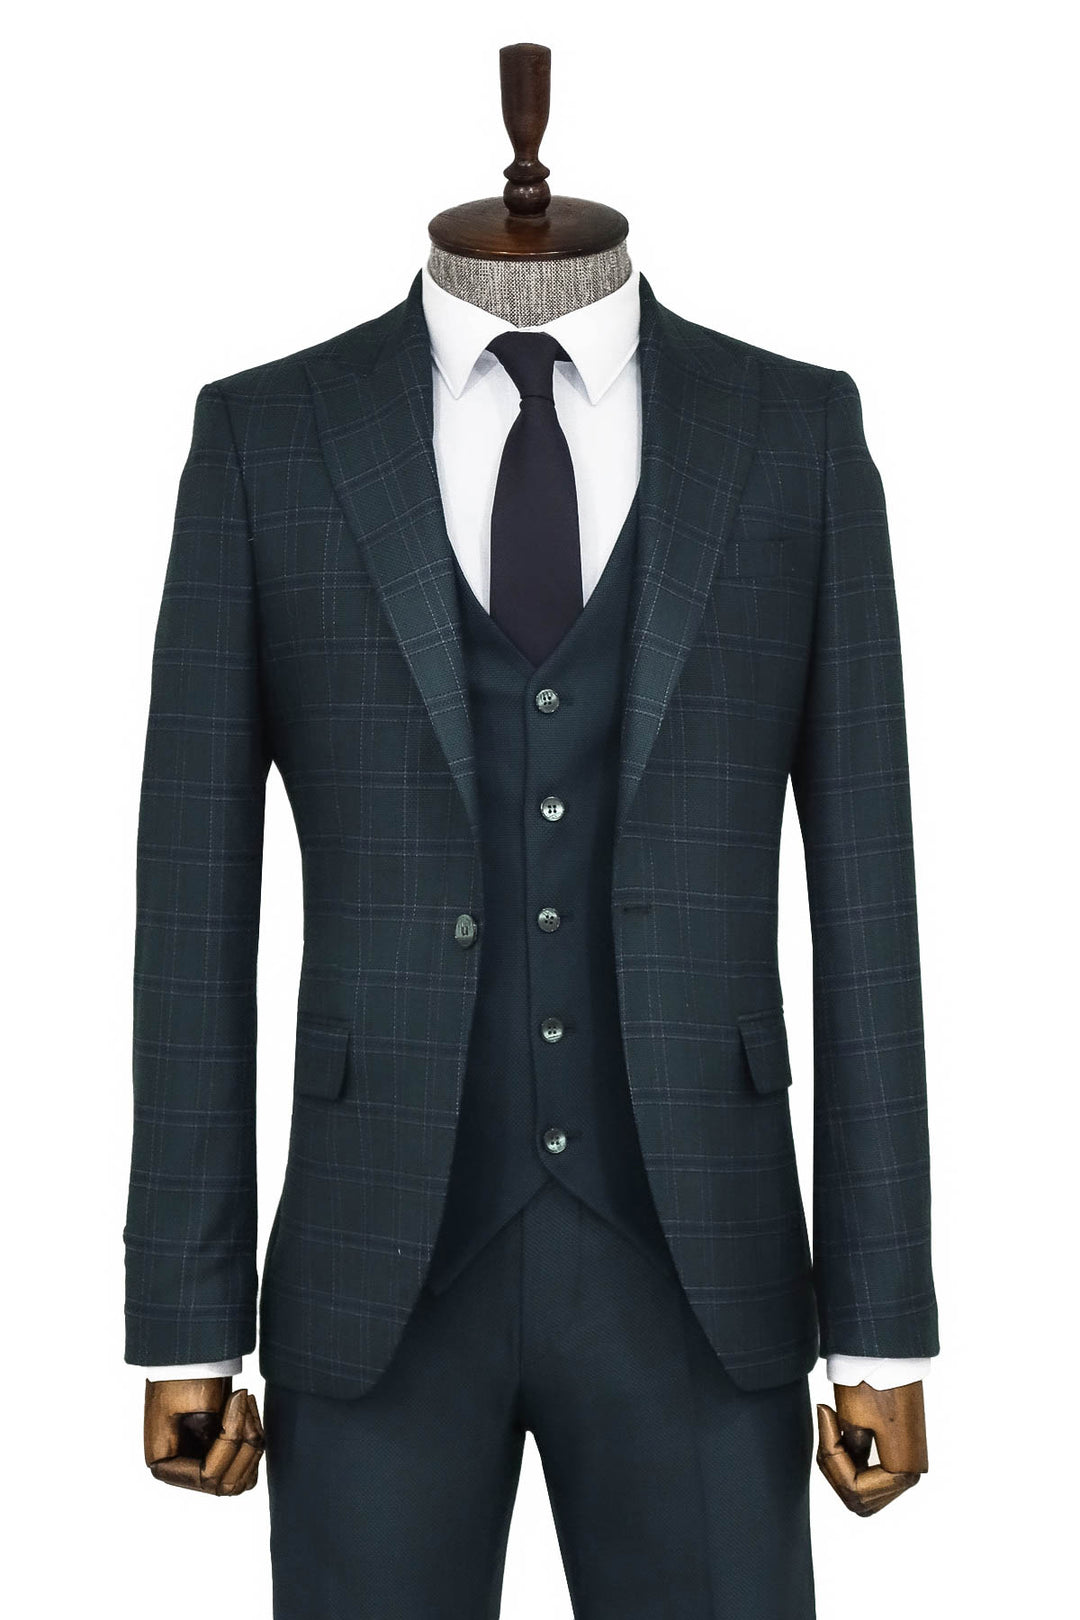 Checked Slim Fit Green Men Suit and Shirt Combination - Wessi